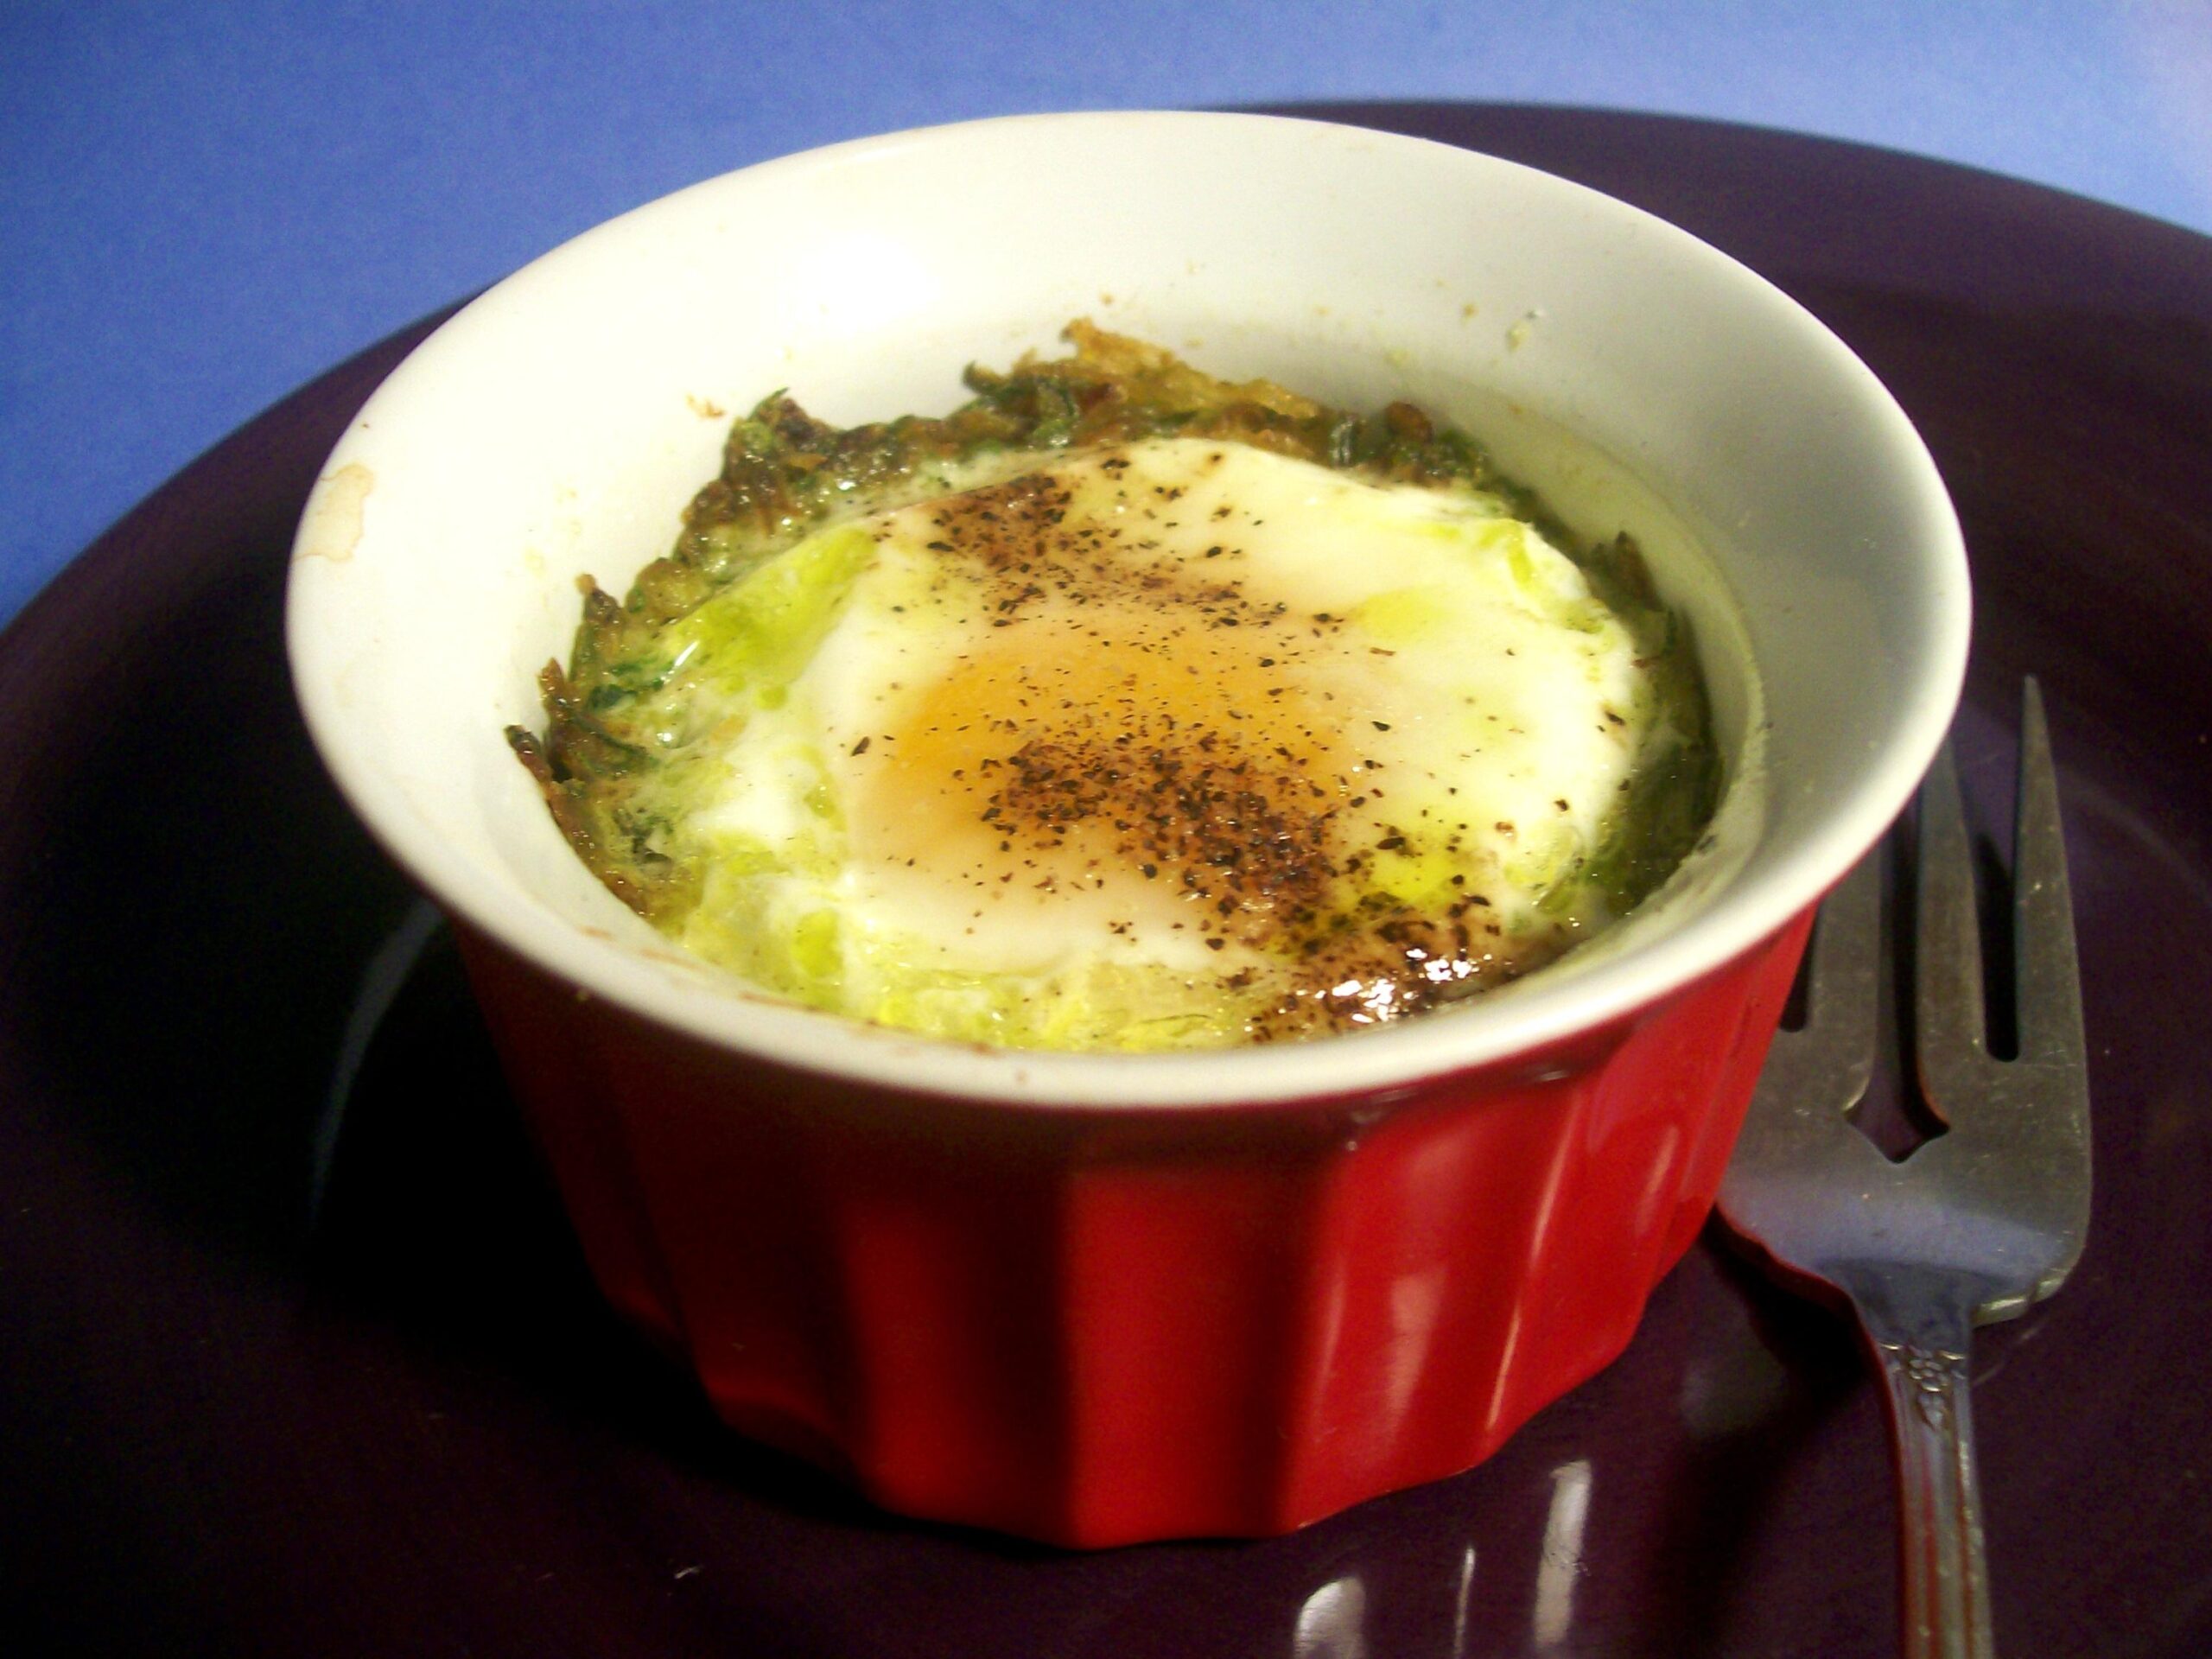  Wake up to the aroma of baked eggs and zucchini cooking in your oven.